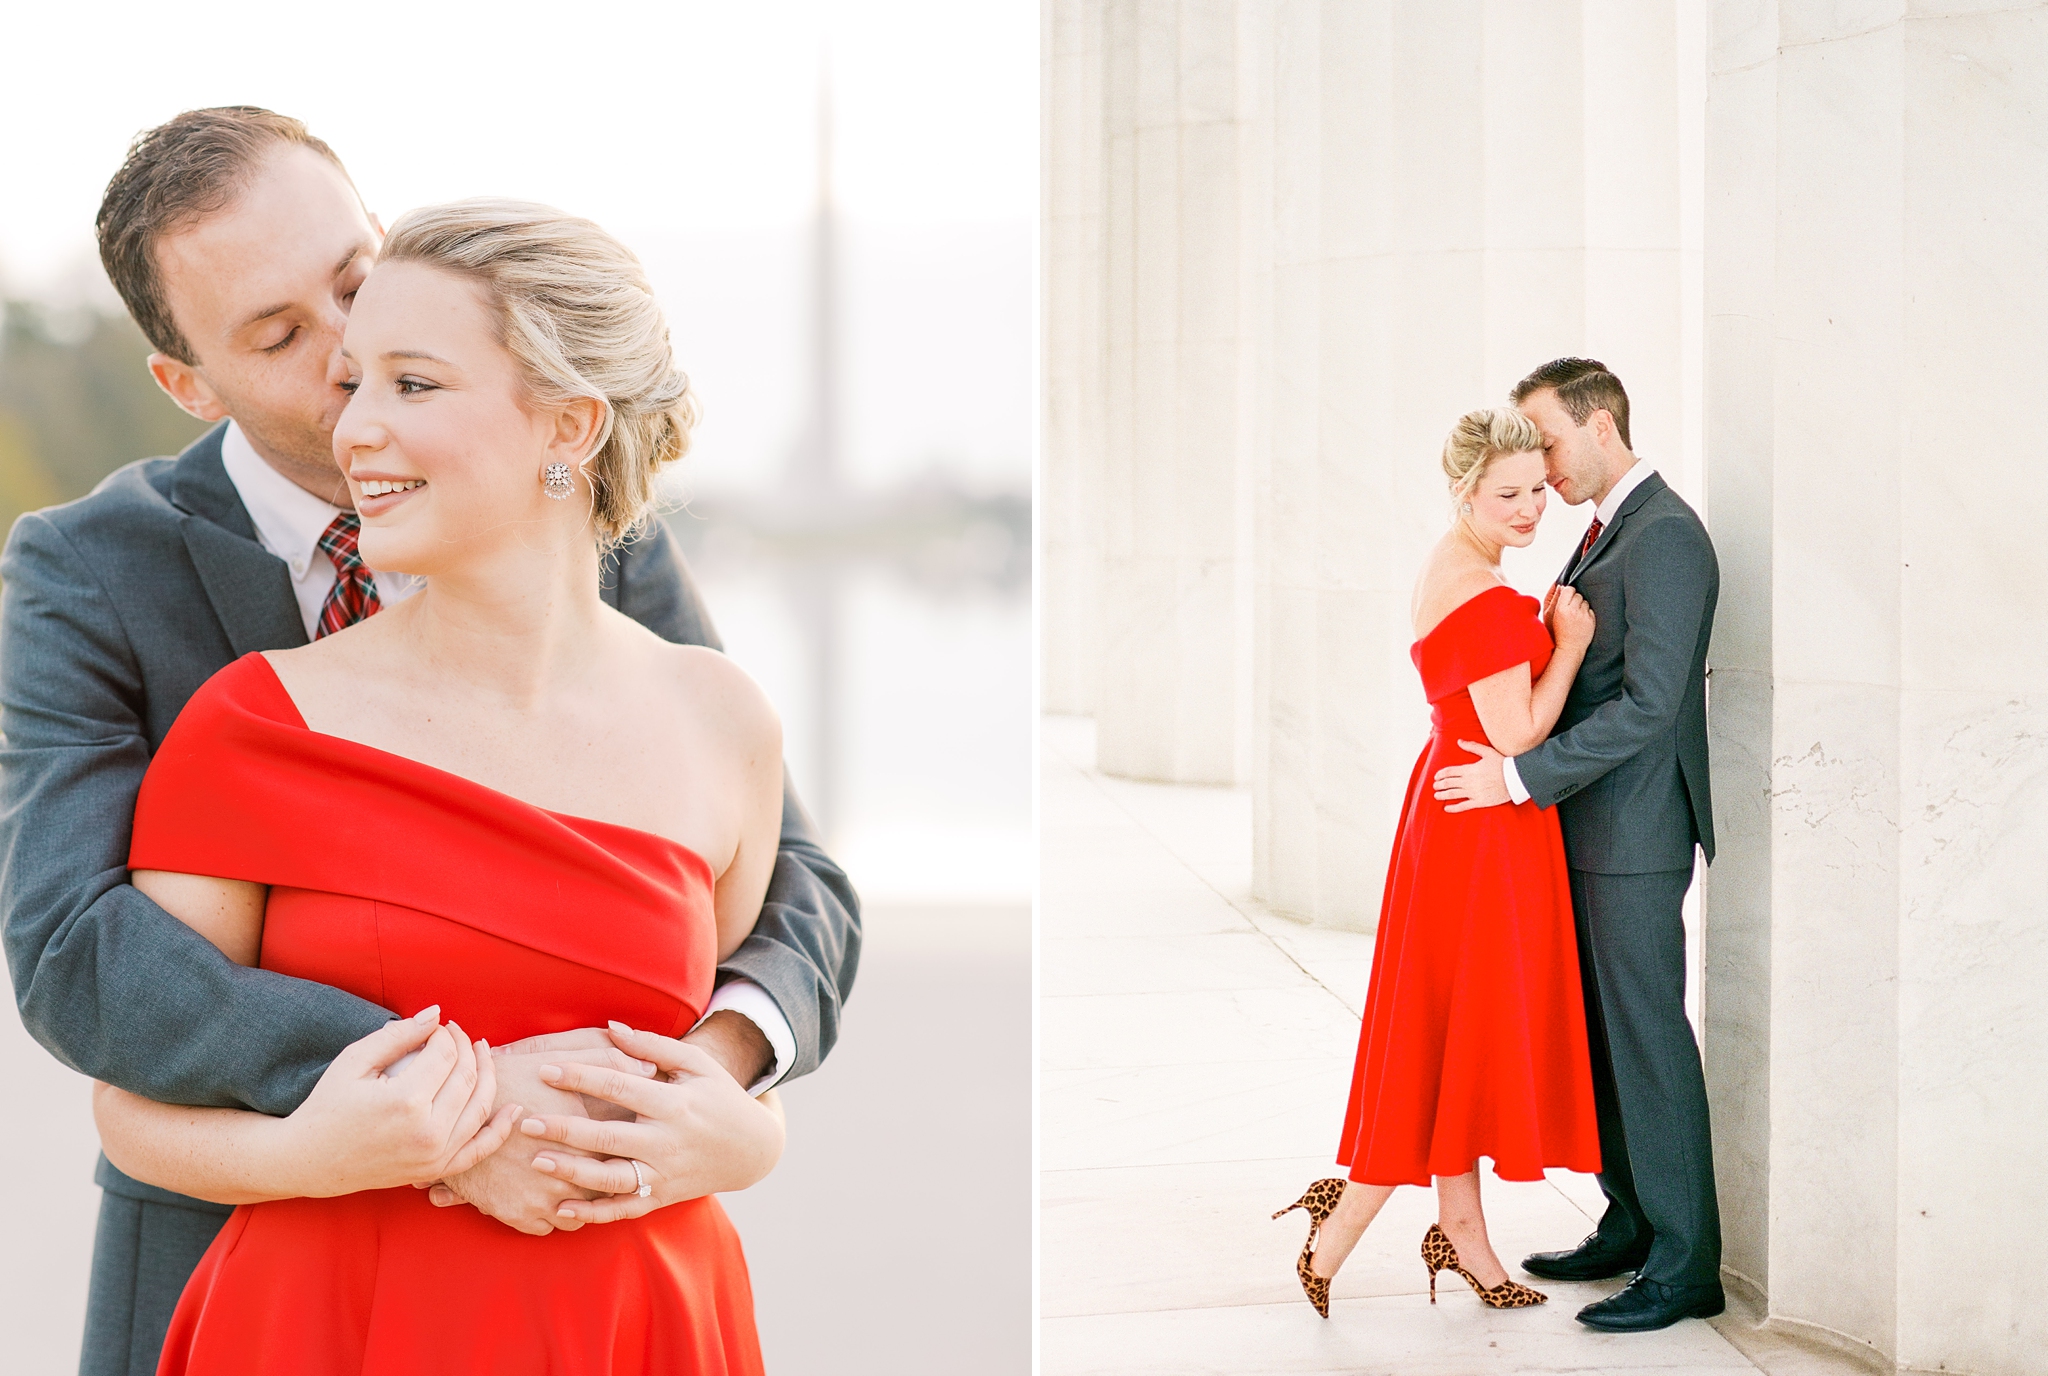 A holiday inspired engagement session at the iconic monuments of Washington, DC